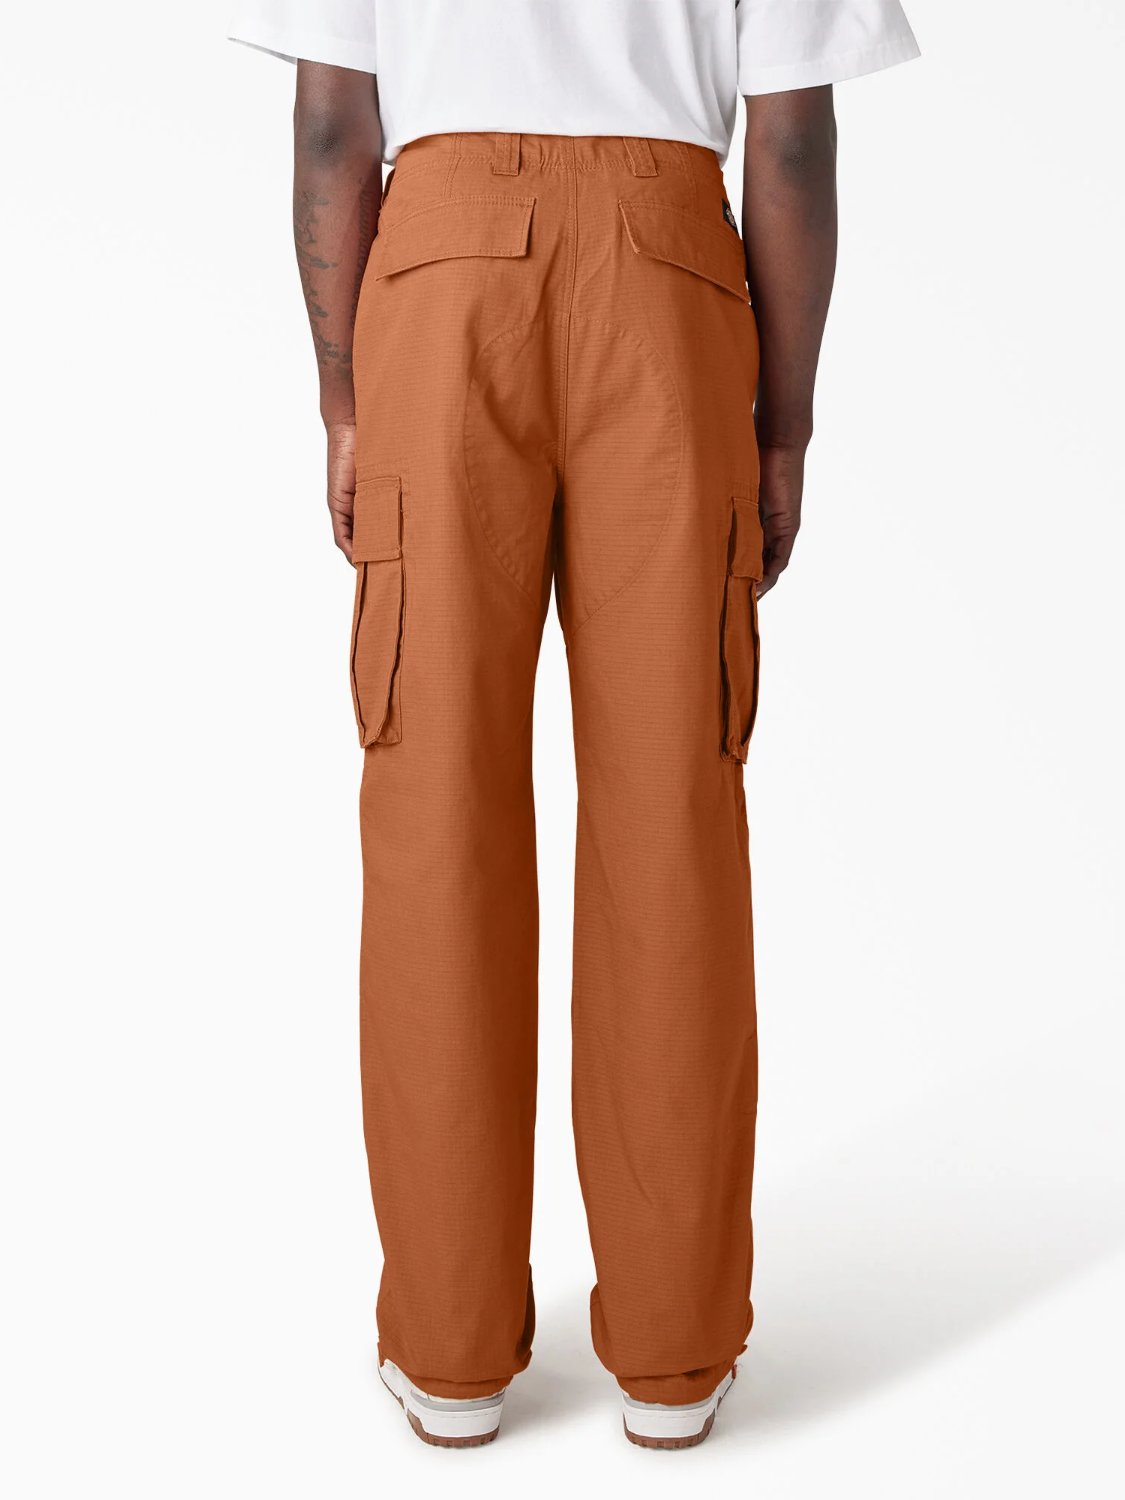 DICKIES EAGLE BEND RELAXED FIT DOUBLE KNEE CARGO PANT BOMBAY BROWN